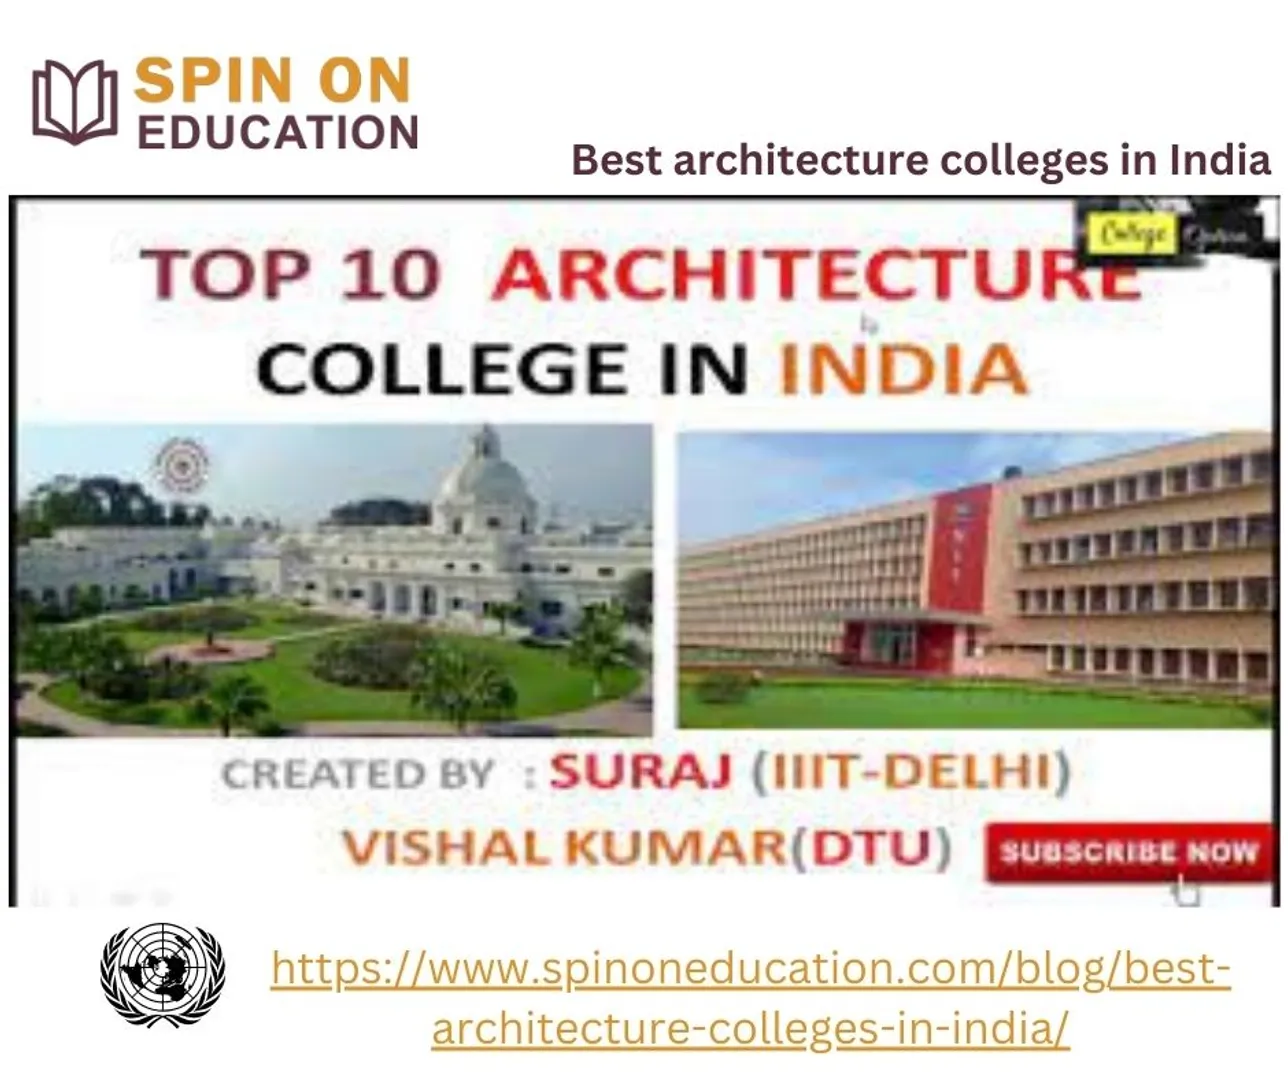 From reliable sources know about best architecture colleges in India 

Want to more about the Best Architecture colleges in India? How can I enroll in such colleges? For all sorts of queries, consider contacting our team of professionals. You can also navigate to our website for more details about the fees, placement, and other things. We have all the information about the colleges and their entrance exams. 
https://www.spinoneducation.com/blog/vbest-architecture-colleges-in-india/